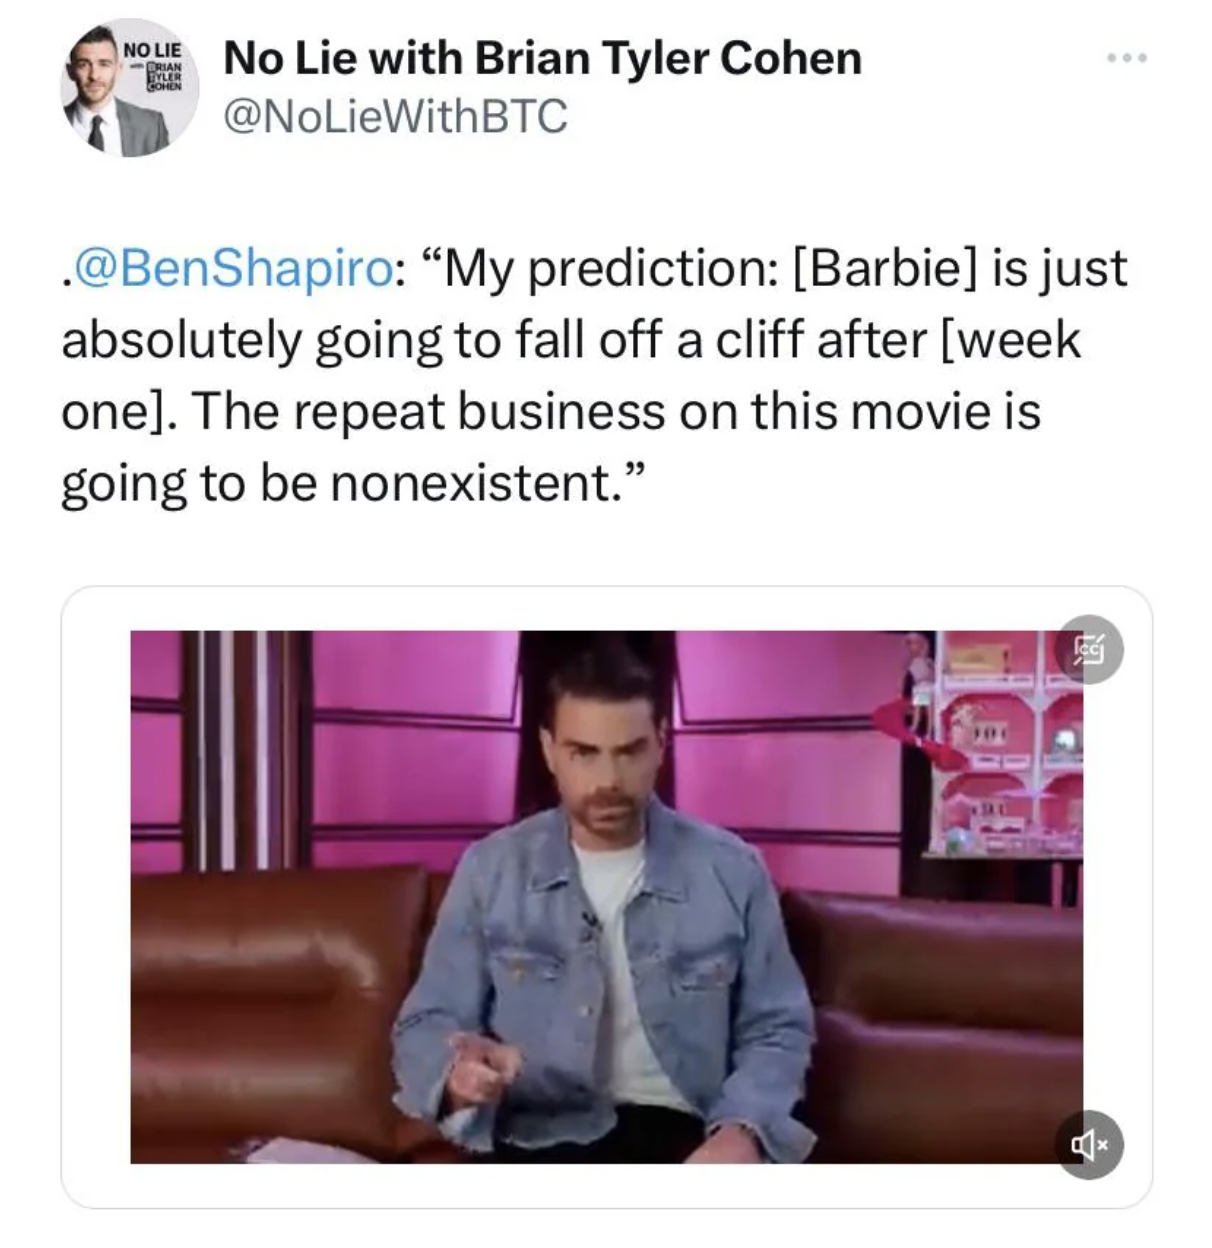 screenshot - Nolie No Lie with Brian Tyler Cohen . "My prediction Barbie is just absolutely going to fall off a cliff after week one. The repeat business on this movie is going to be nonexistent."